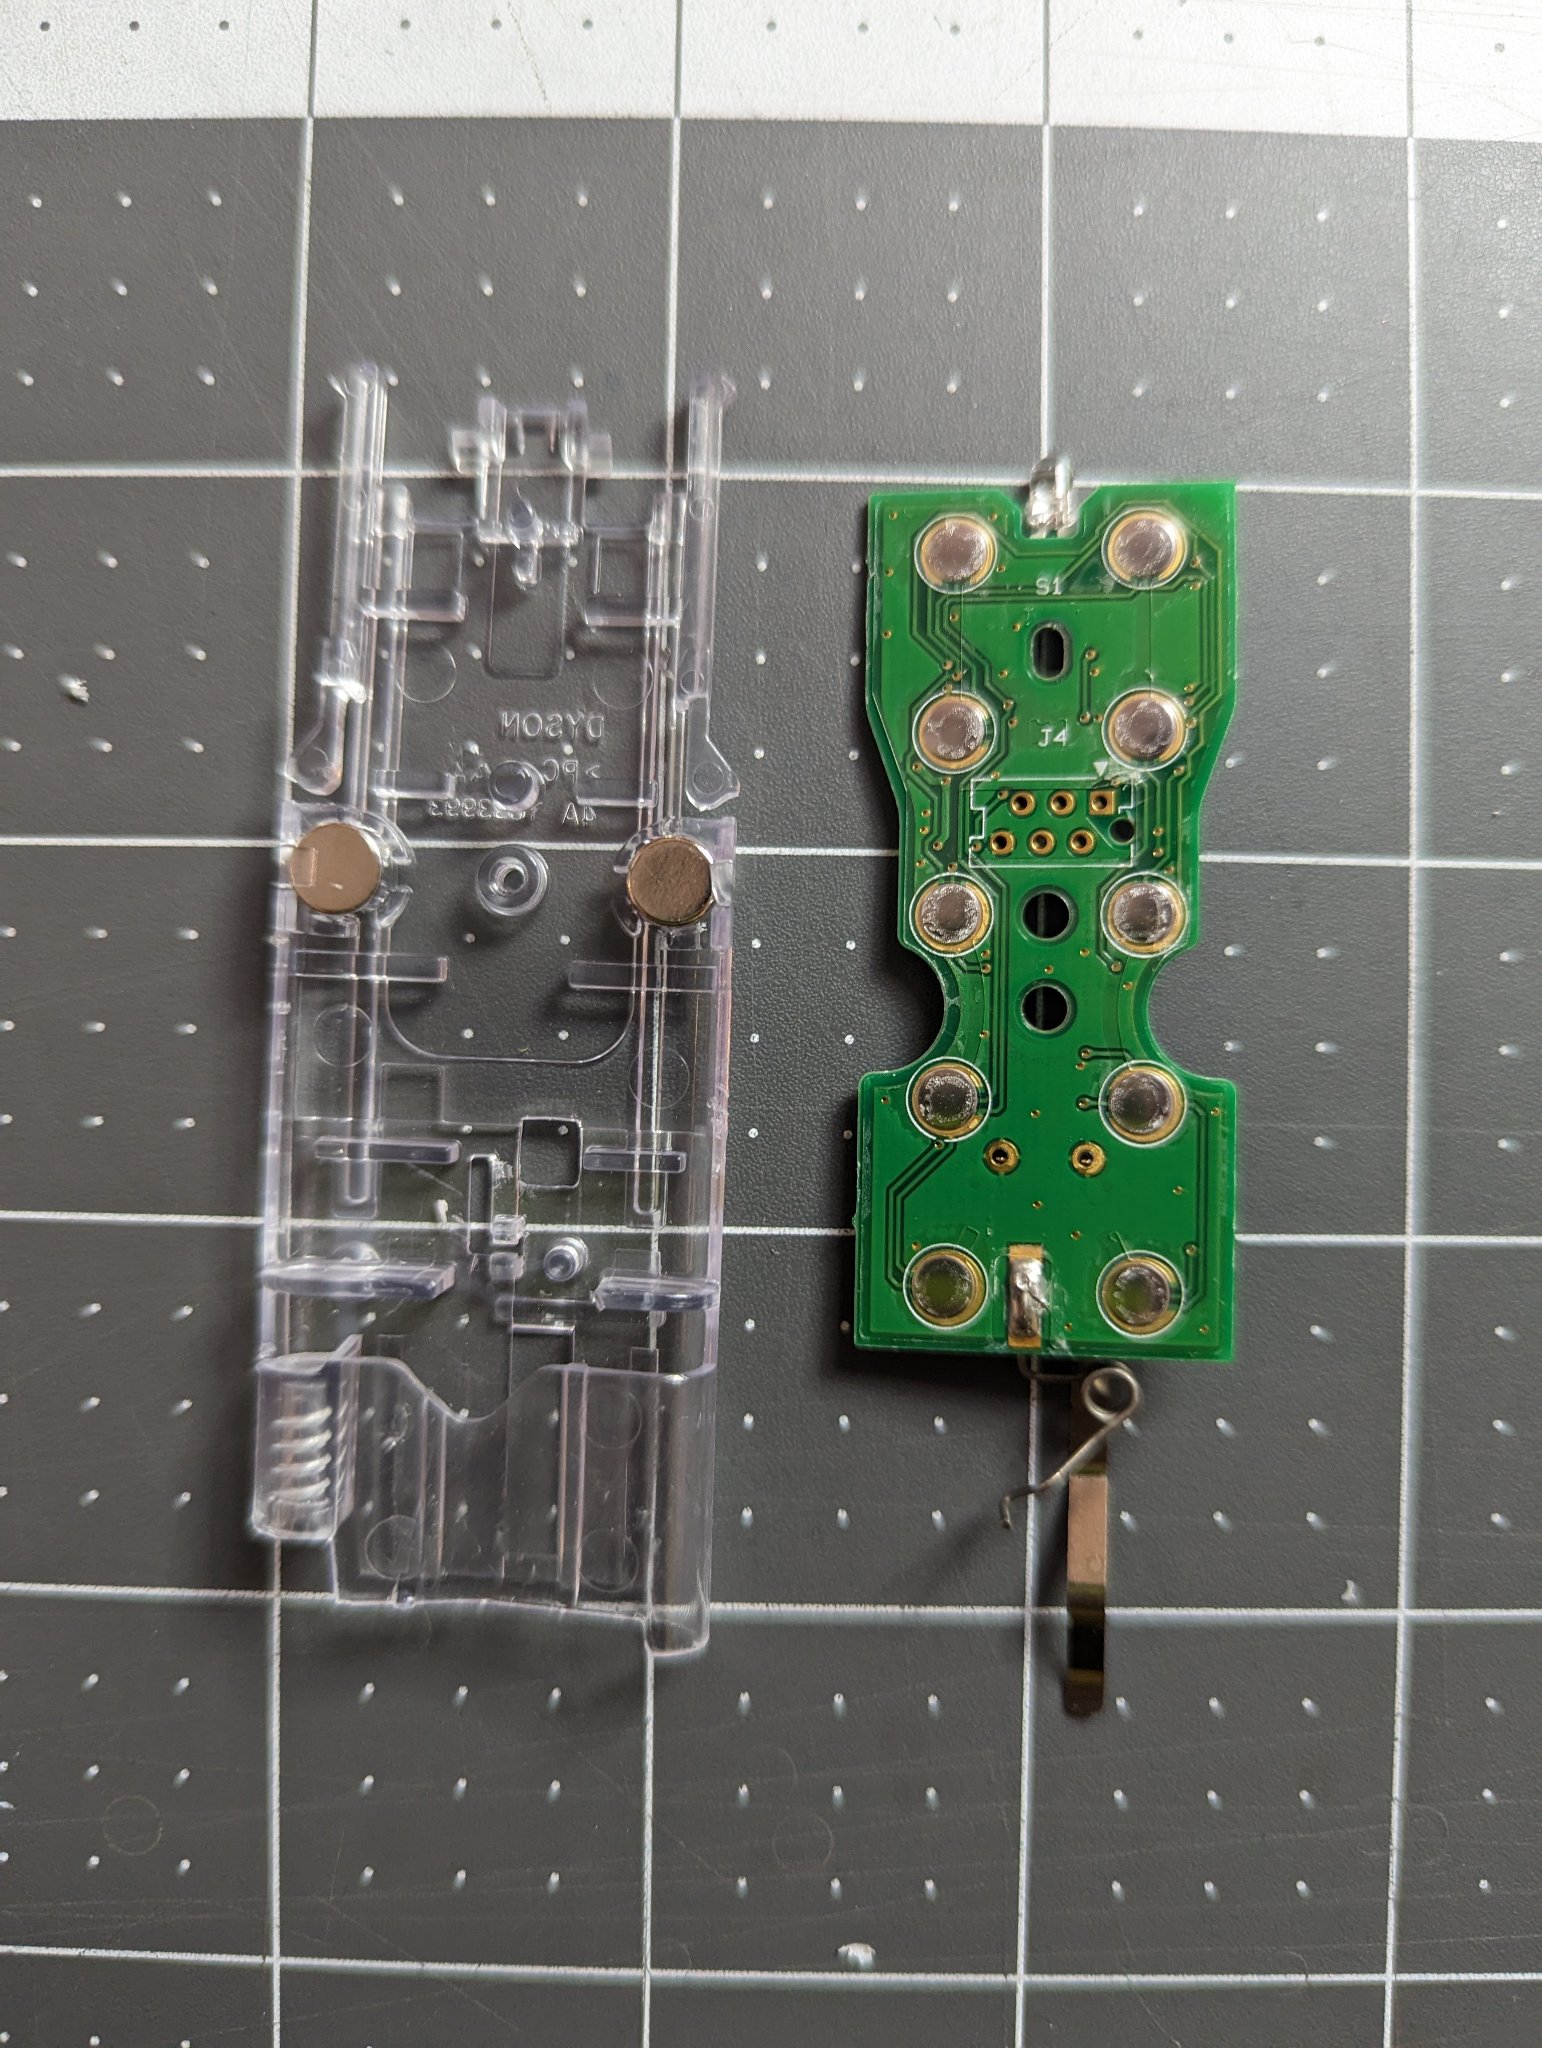 The front of the remote PCB with plastic housing containing magnets